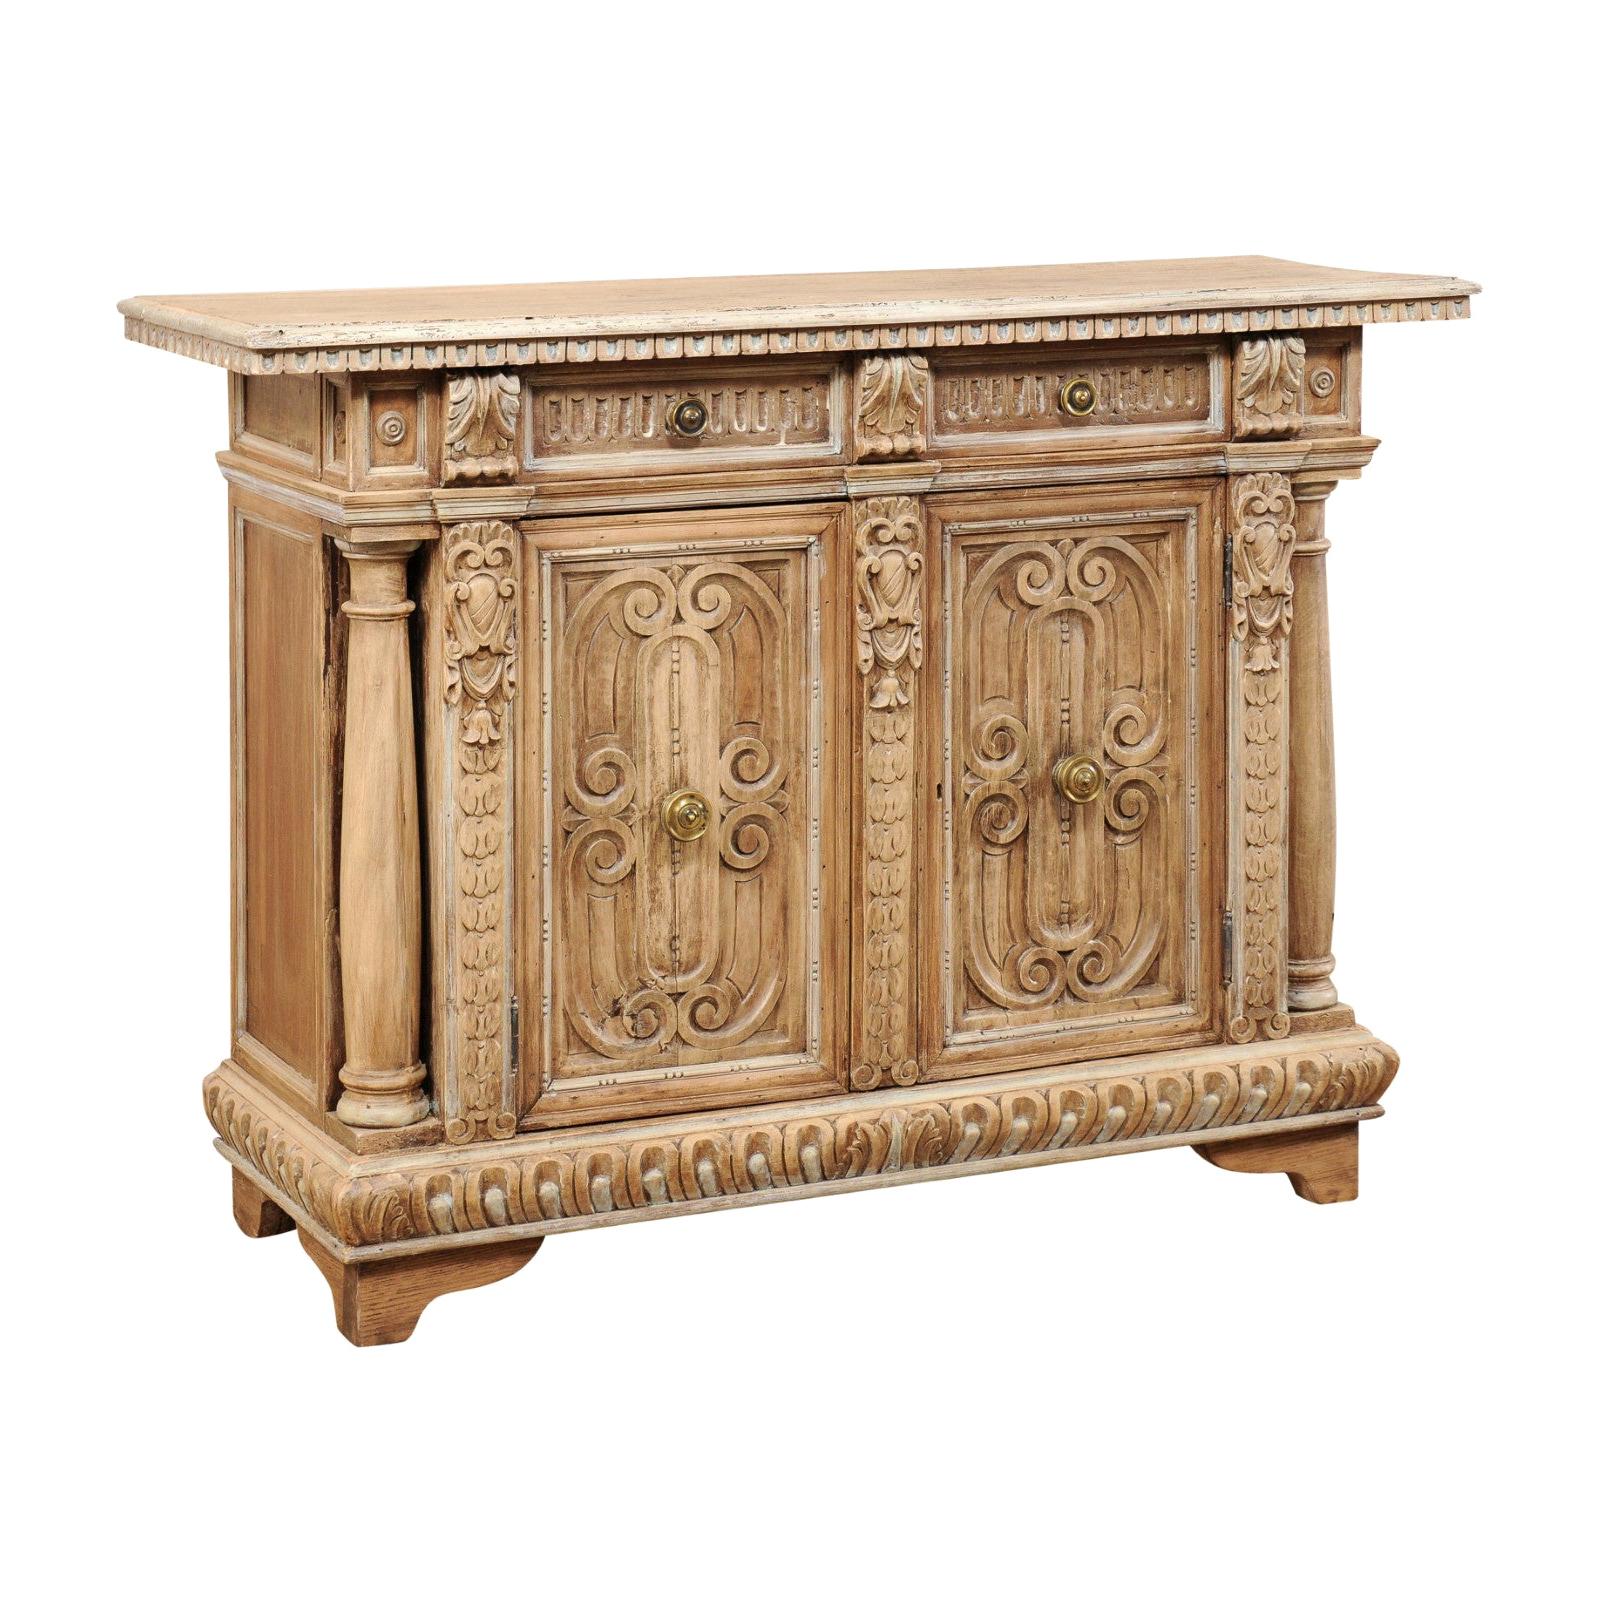 Italian Elaborately-Carved Wood Buffet Console Cabinet, Late 19th Century